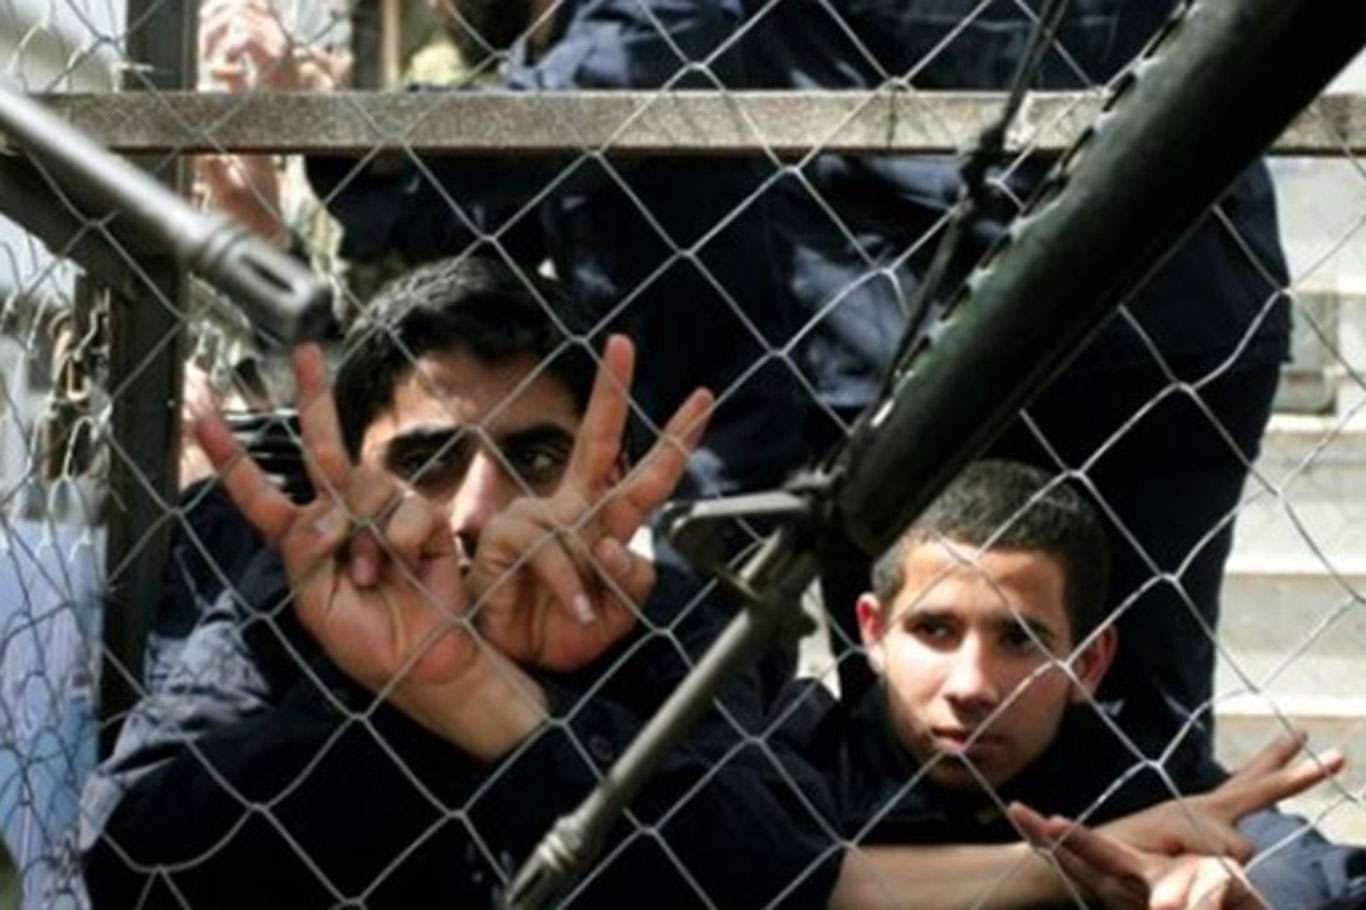 Palestinian children in Damon jail suffer from harsh detention conditions